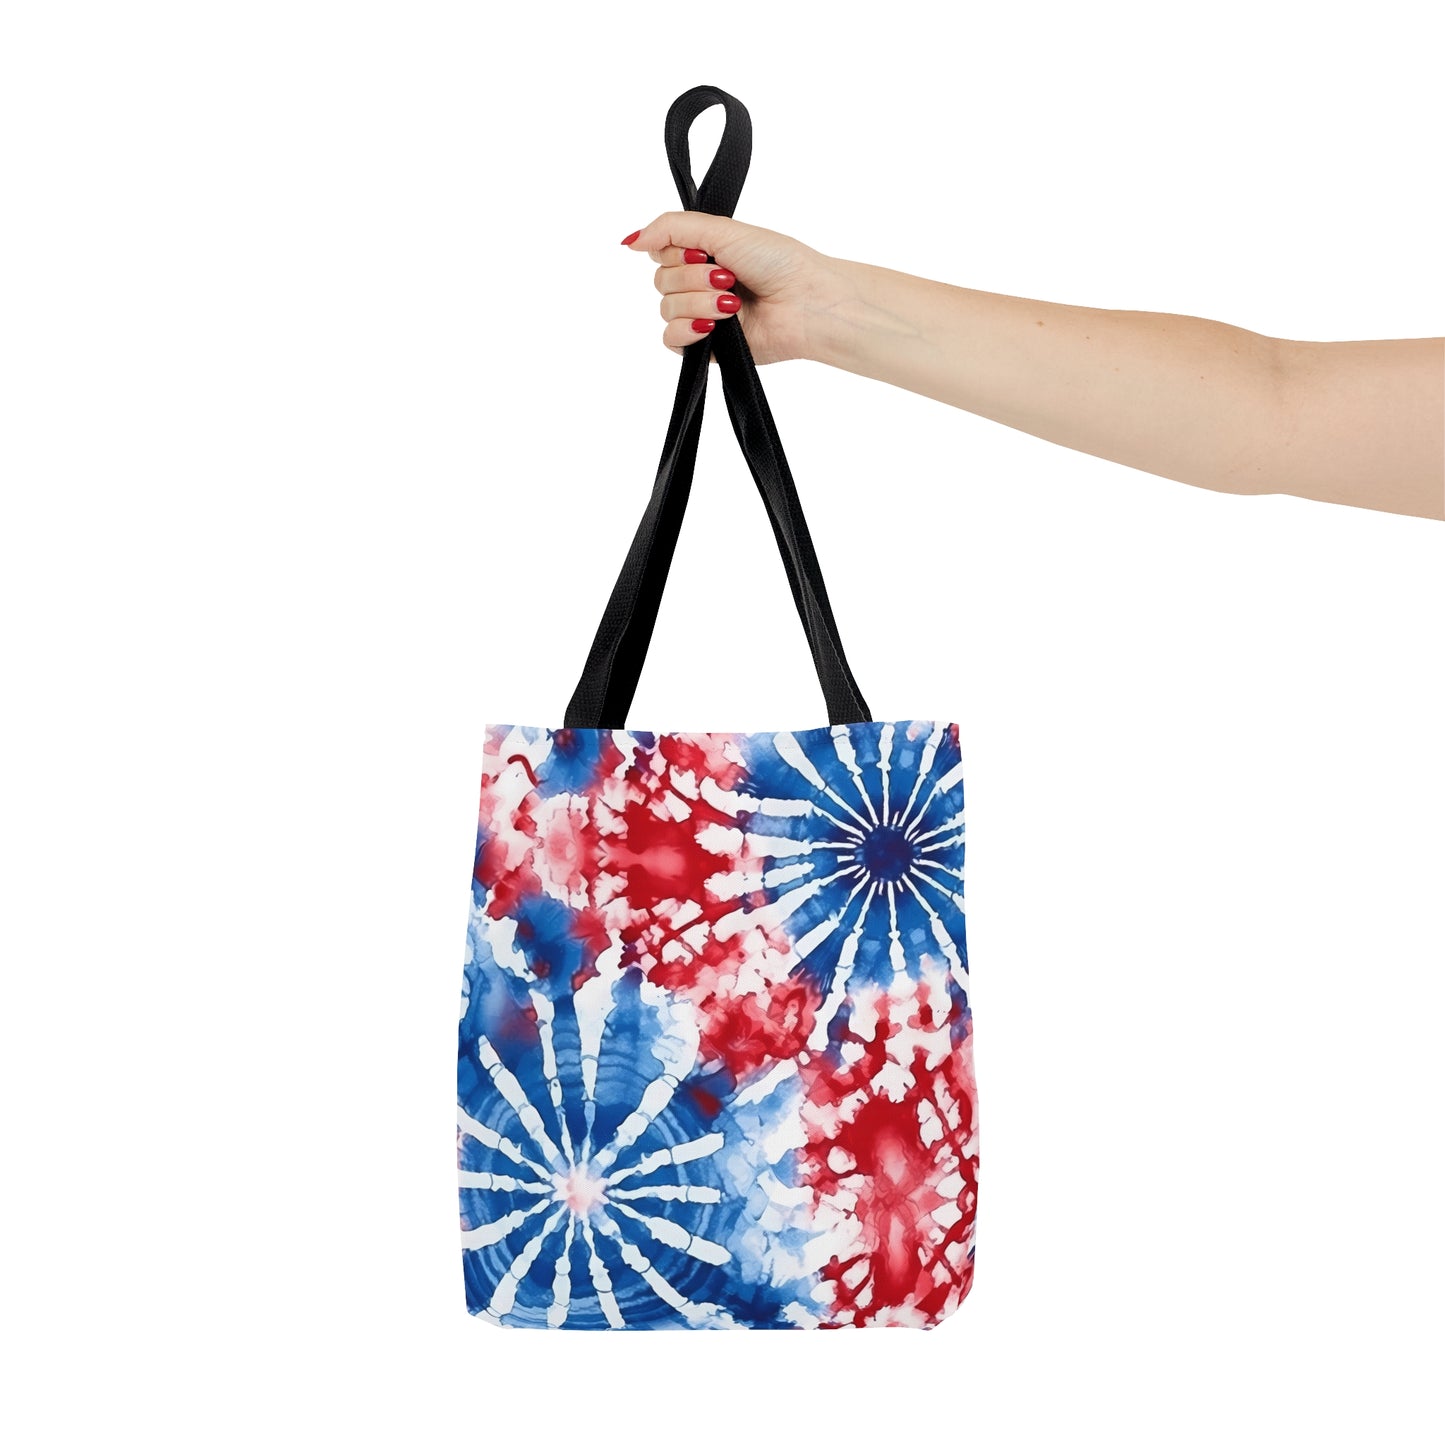 Tie Dye Print Patriotic Tote Bag, Red White Blue Canvas Tote Bag, 4th of July Shopping Bag, Reusable Tote, Summer Tote